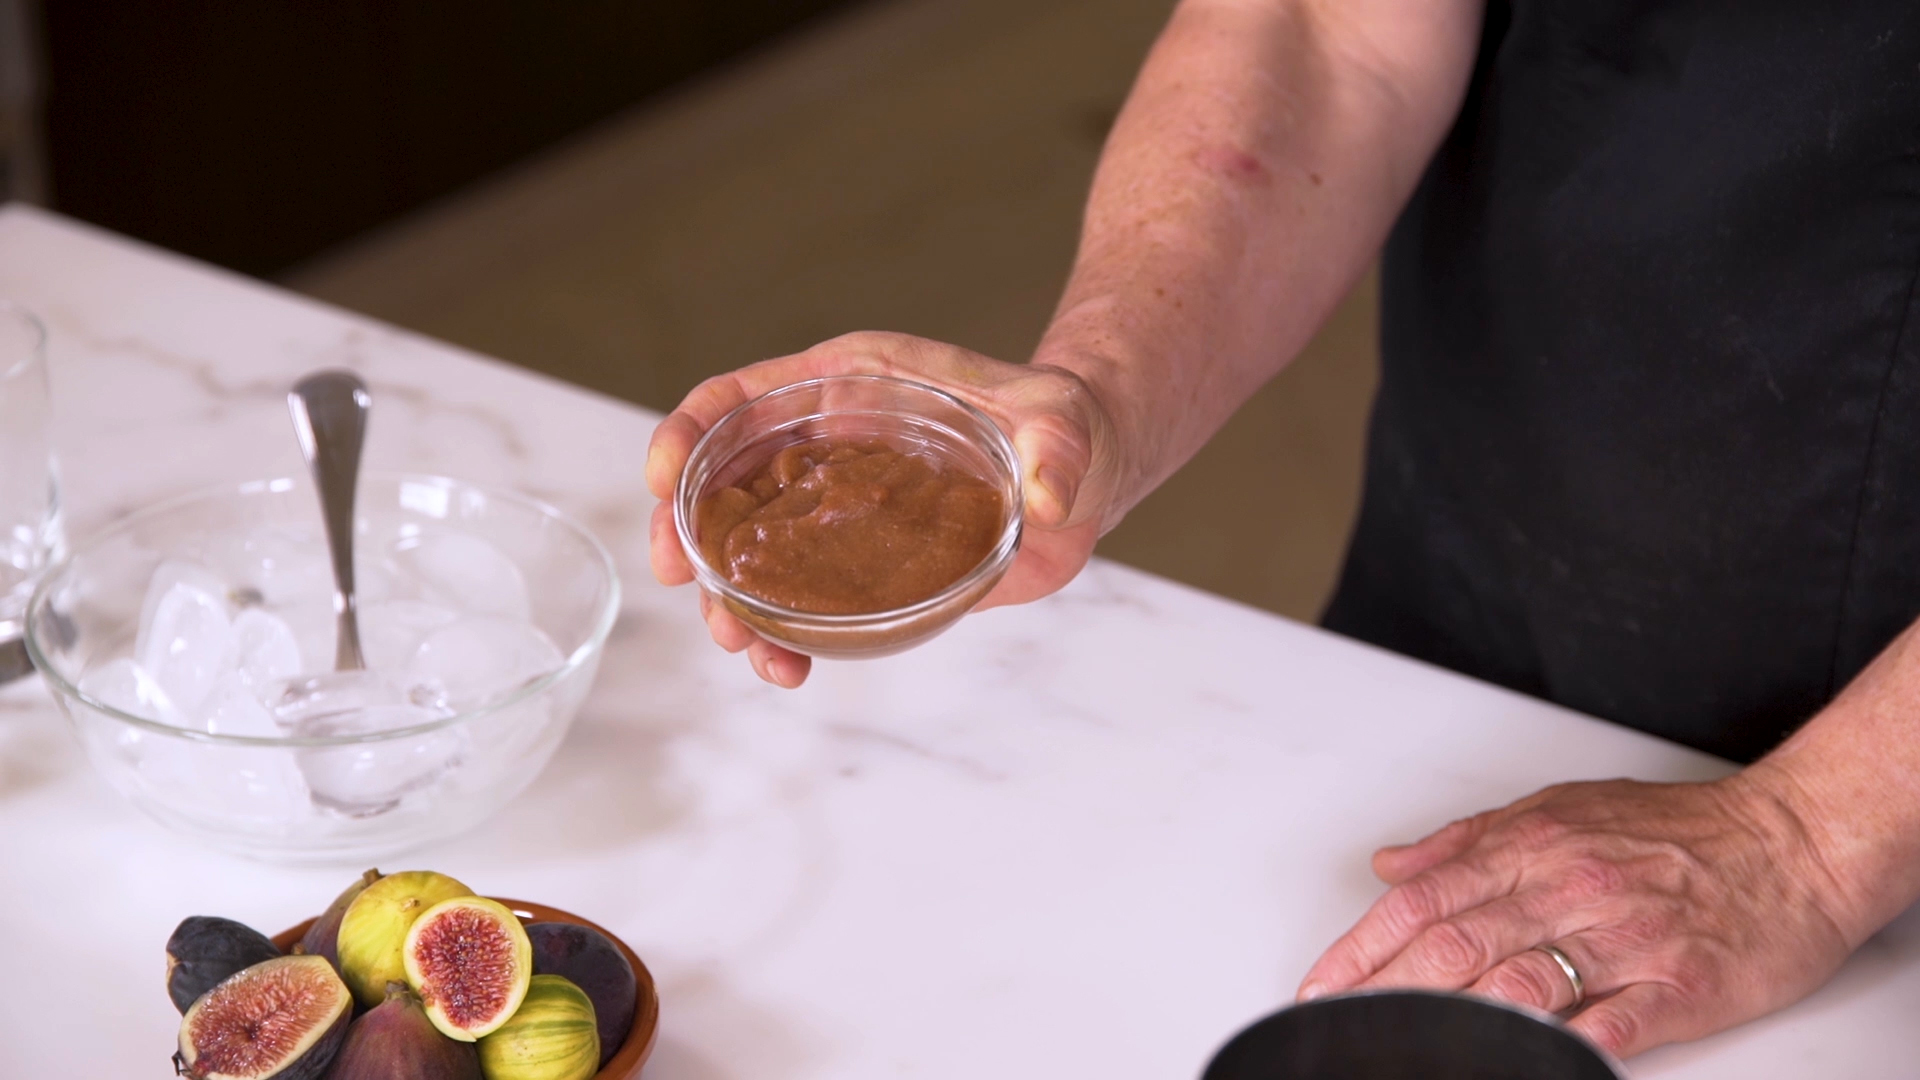 This fig puree can be prepared ahead of time and refrigerated until ready to use.